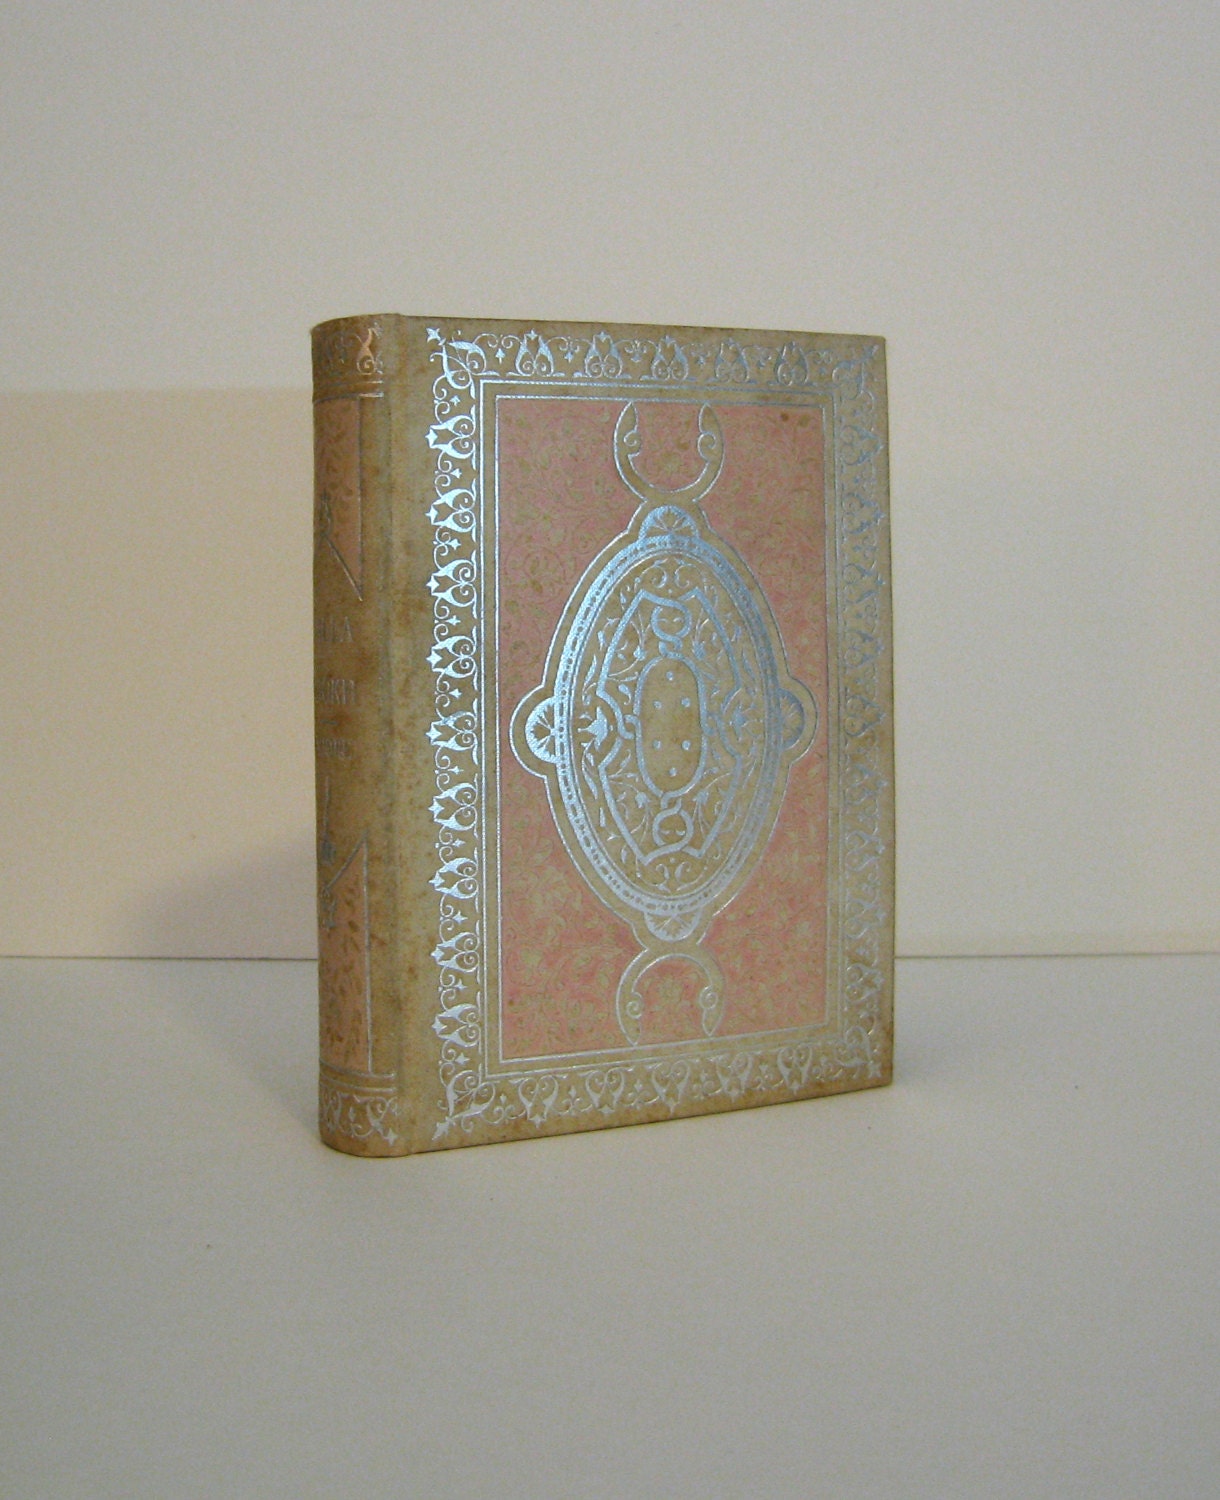 Lalla Rookh by Thomas Moore Small Antique Victorian Era Book from circa 1898 Bound with Silver and Pink Design Published in New York - ProfessorBooknoodle